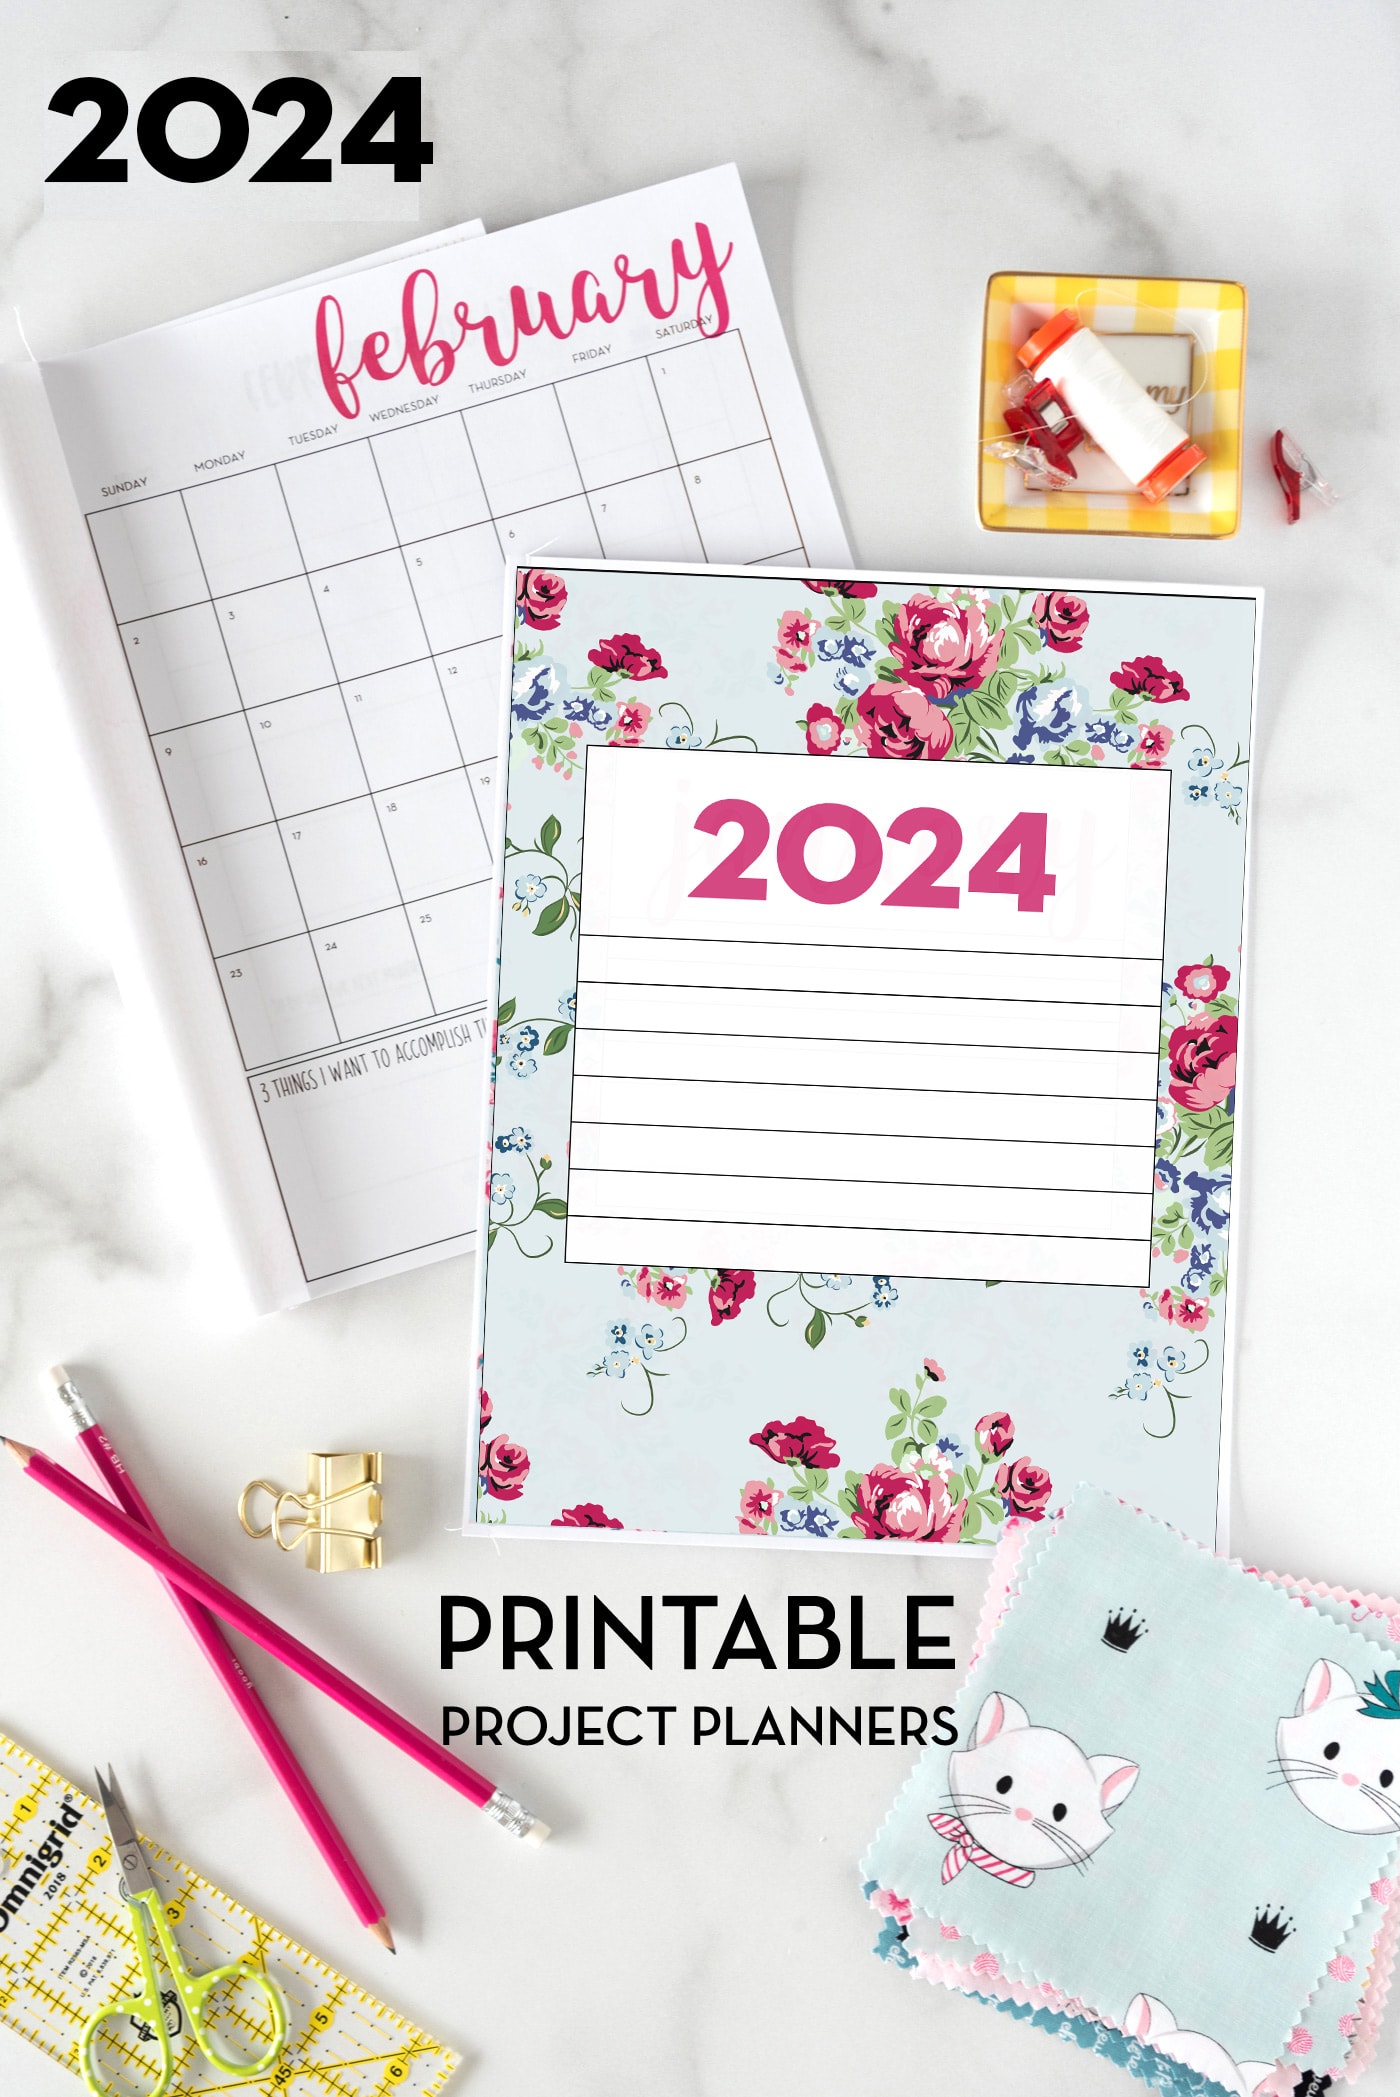 printed out planner pages on white table